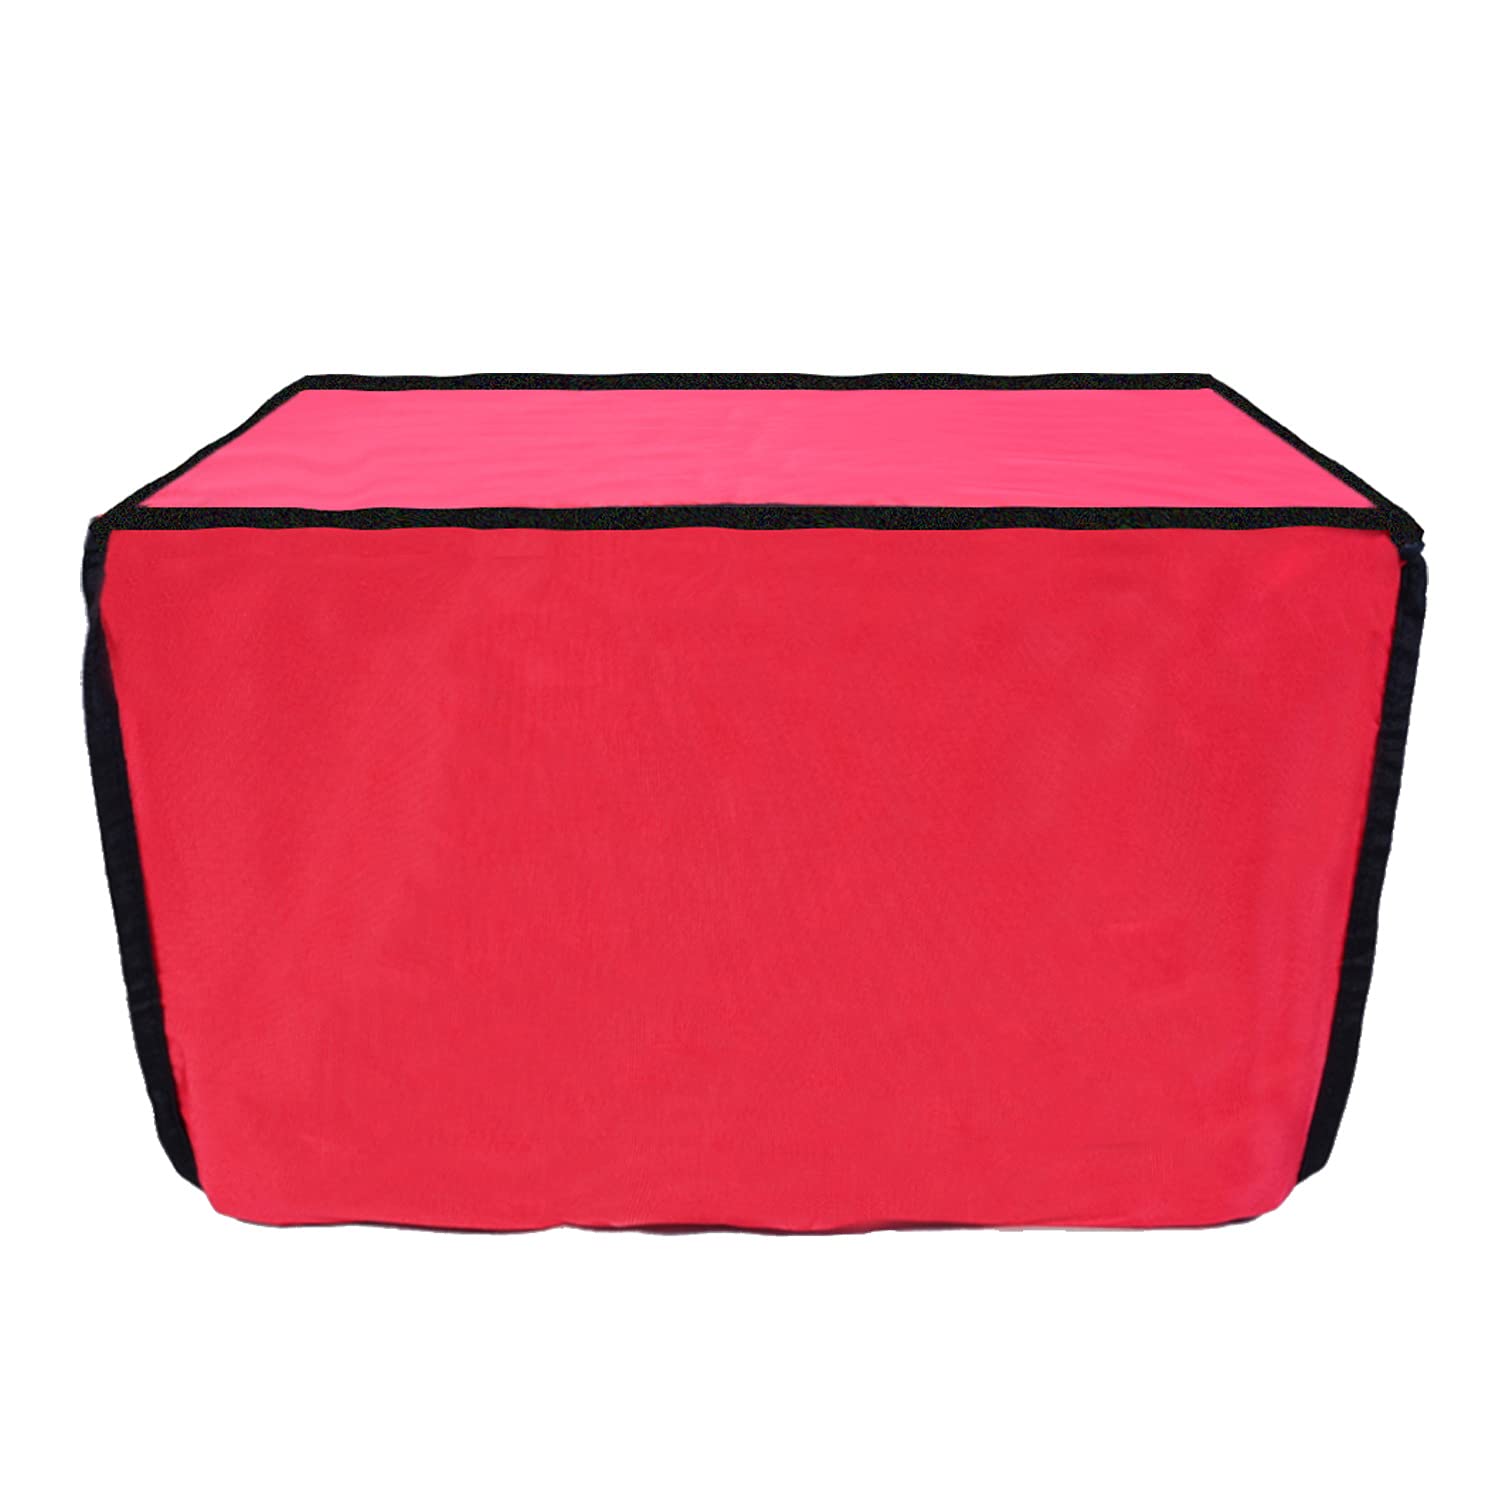 Palap Super Premium Dust Proof Printer Cover for Brother DCP-L2520D(Red- 45.9 x 44.85 x 31.7 CMs)